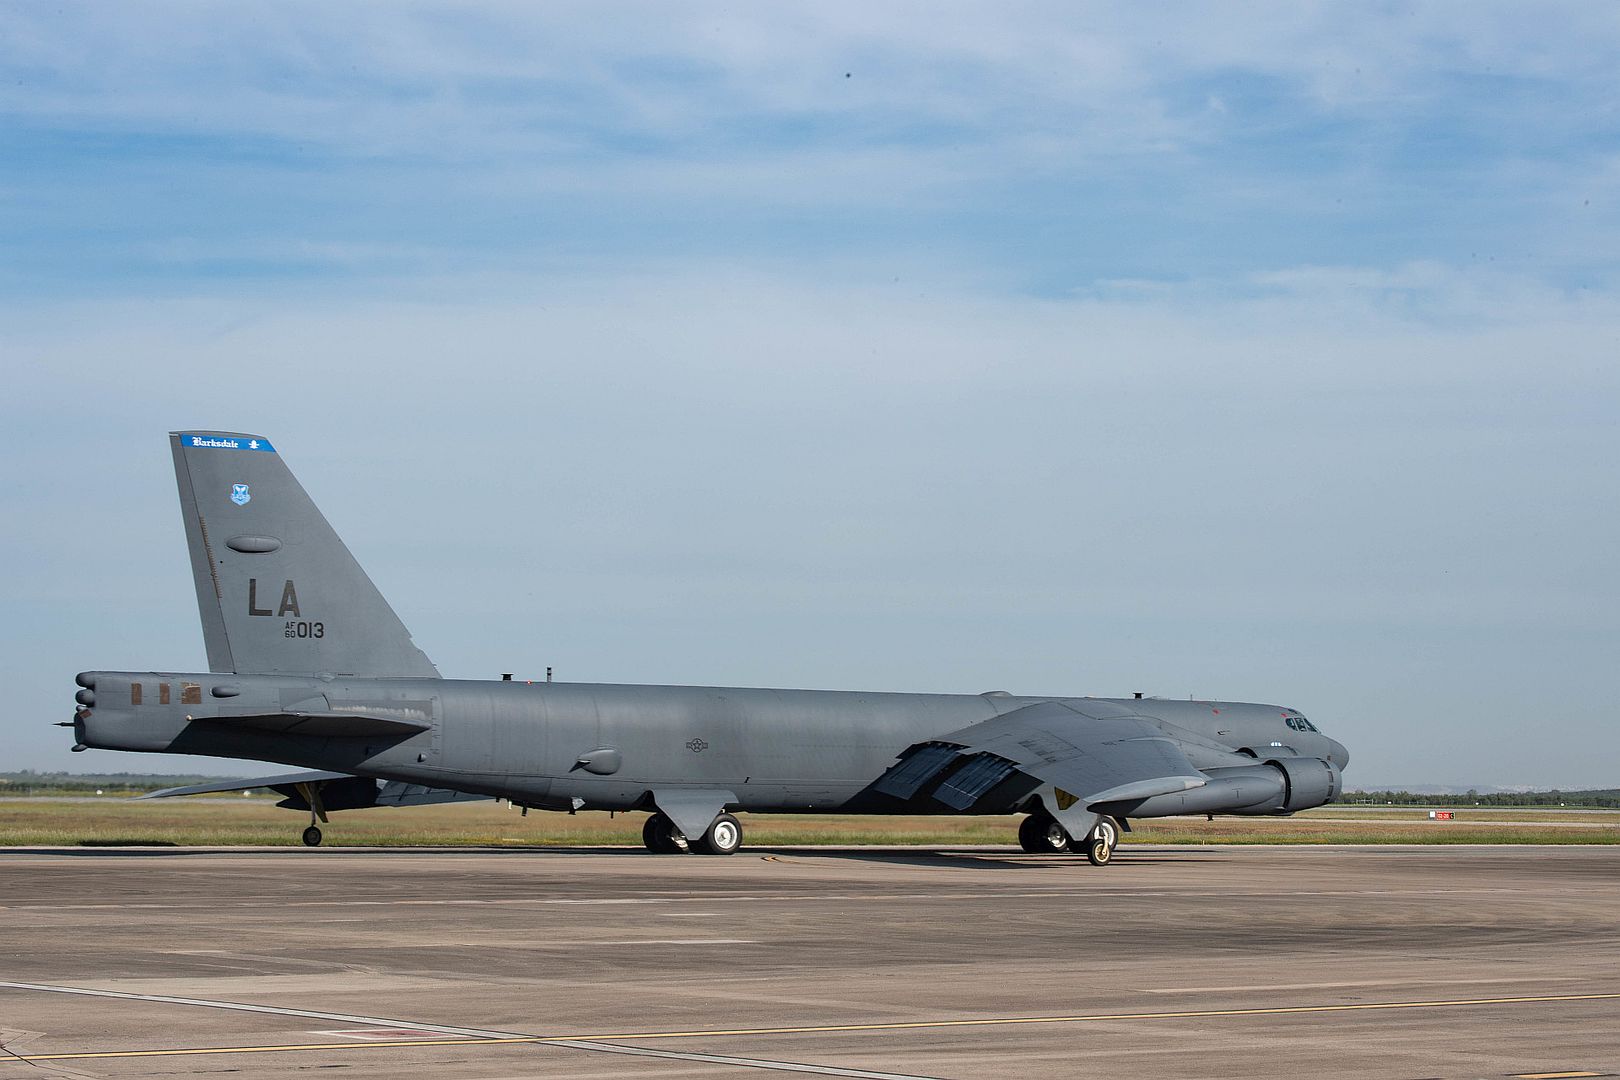 52H Stratofortress Assigned To The 2nd Bomb Wing Barksdale Air Force Base Taxis As It Prepares For Takeoff At Moron Air Base Spain May 21 2021